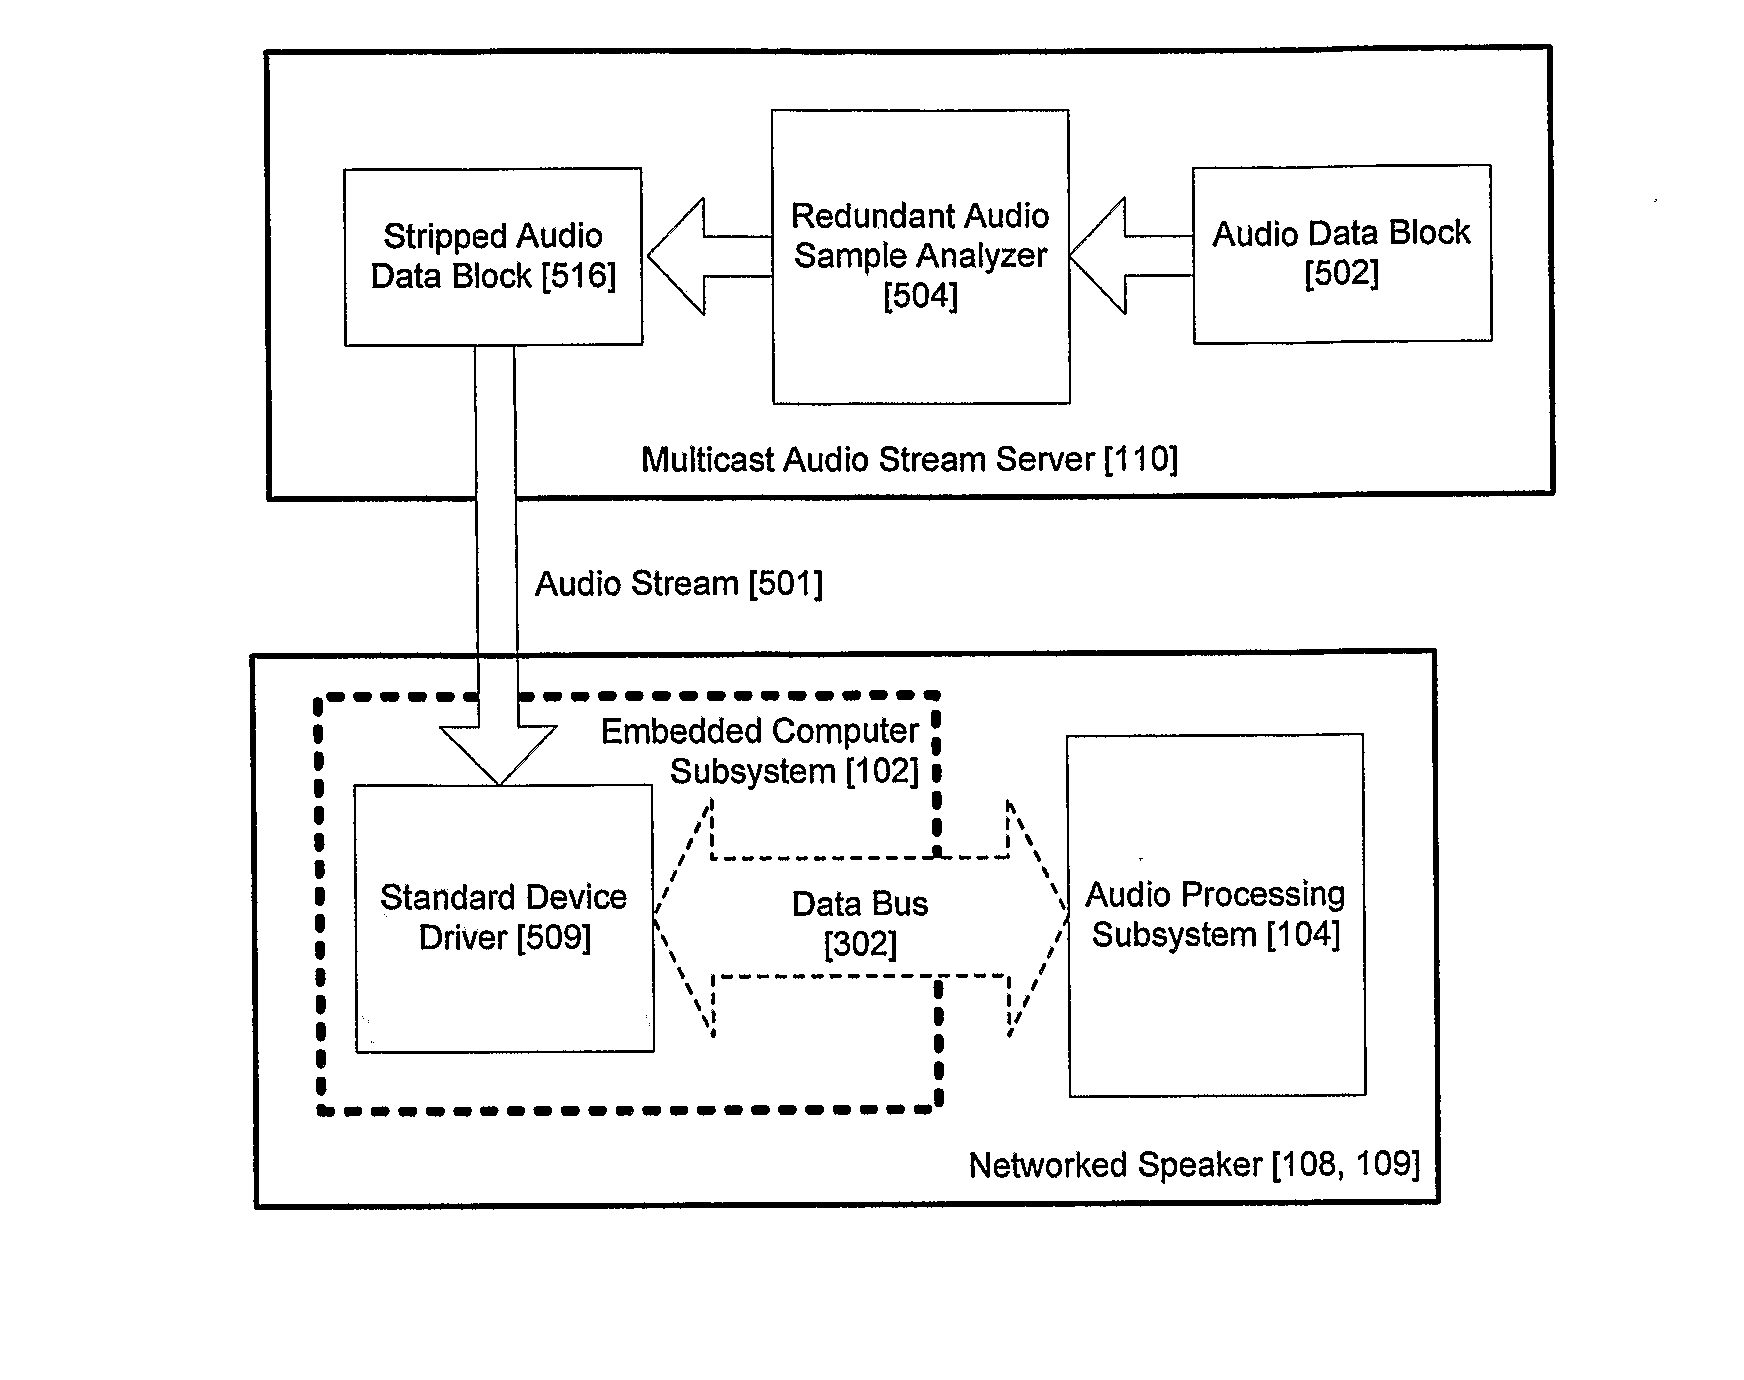 Synchronizing Multi-Channel Speakers Over a Network